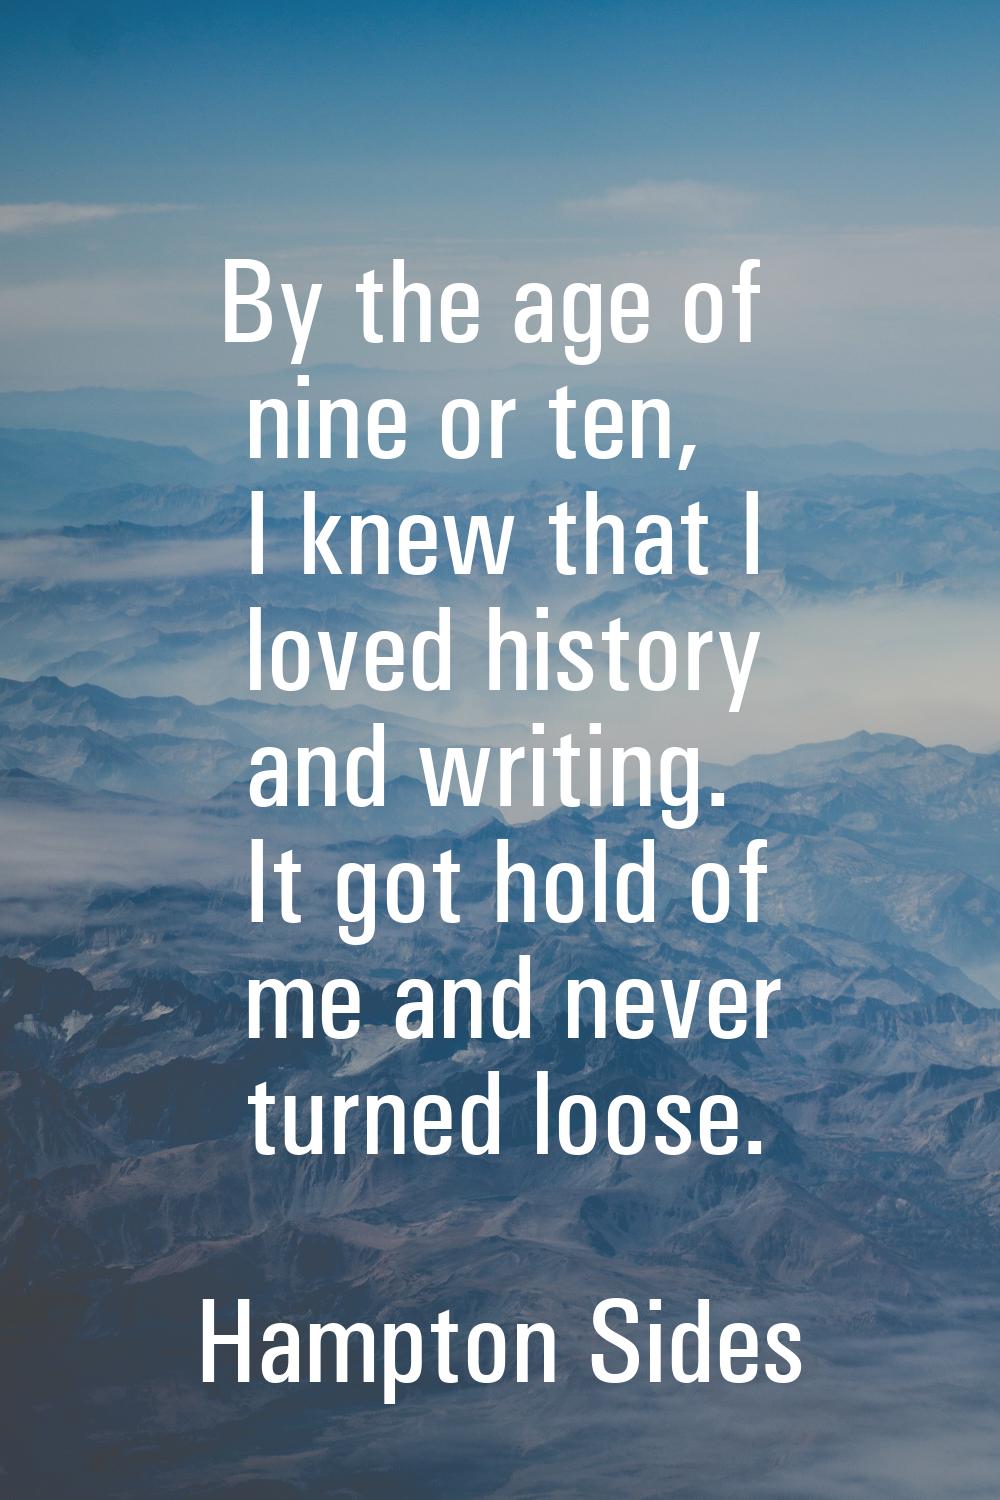 By the age of nine or ten, I knew that I loved history and writing. It got hold of me and never tur